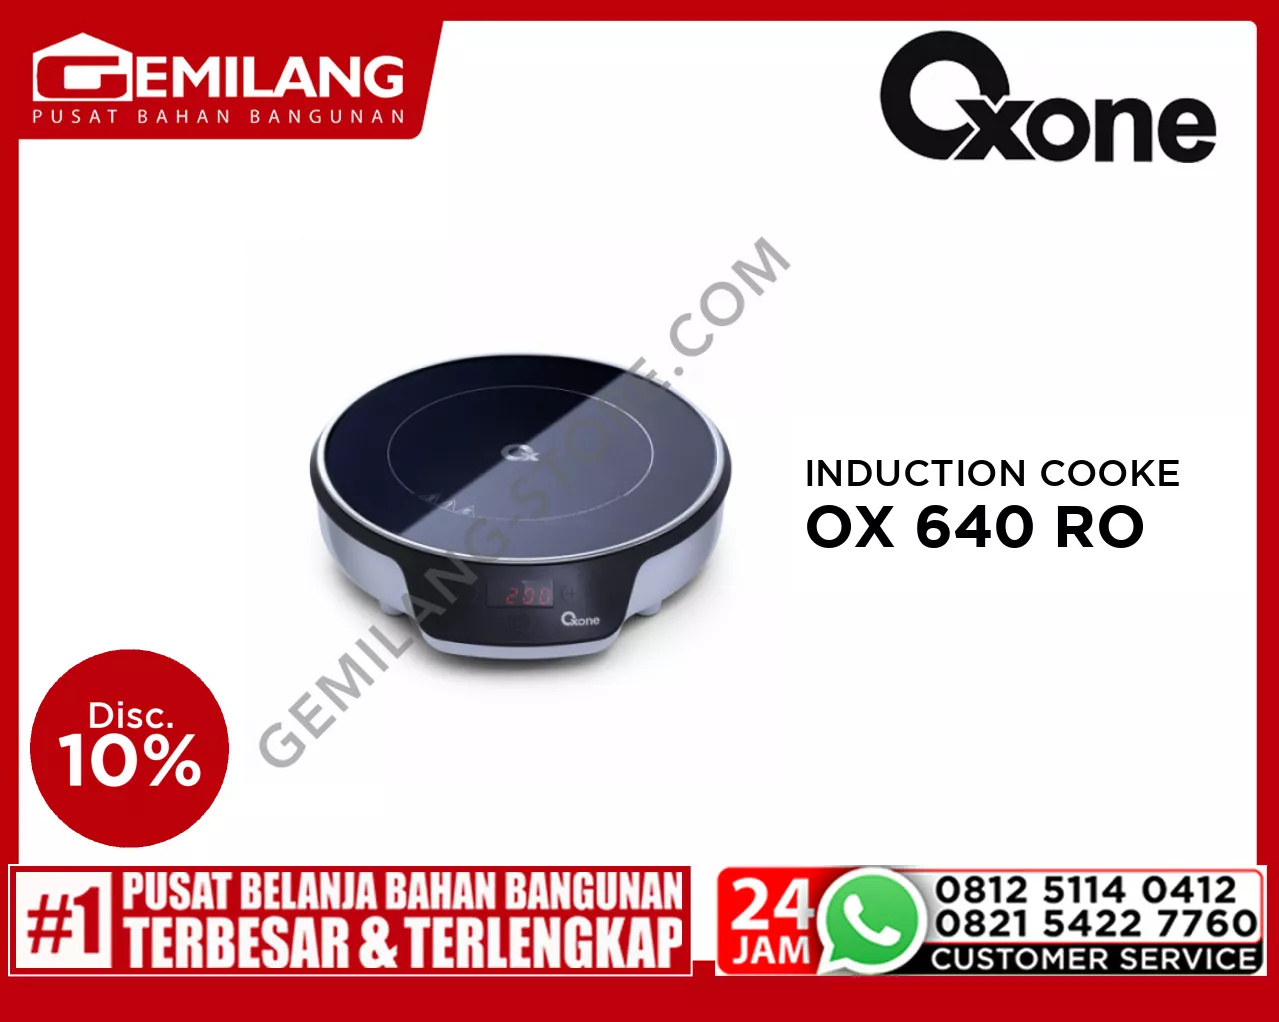 OXONE RINK PORTABLE INDUCTION COOKER OX 640 RO